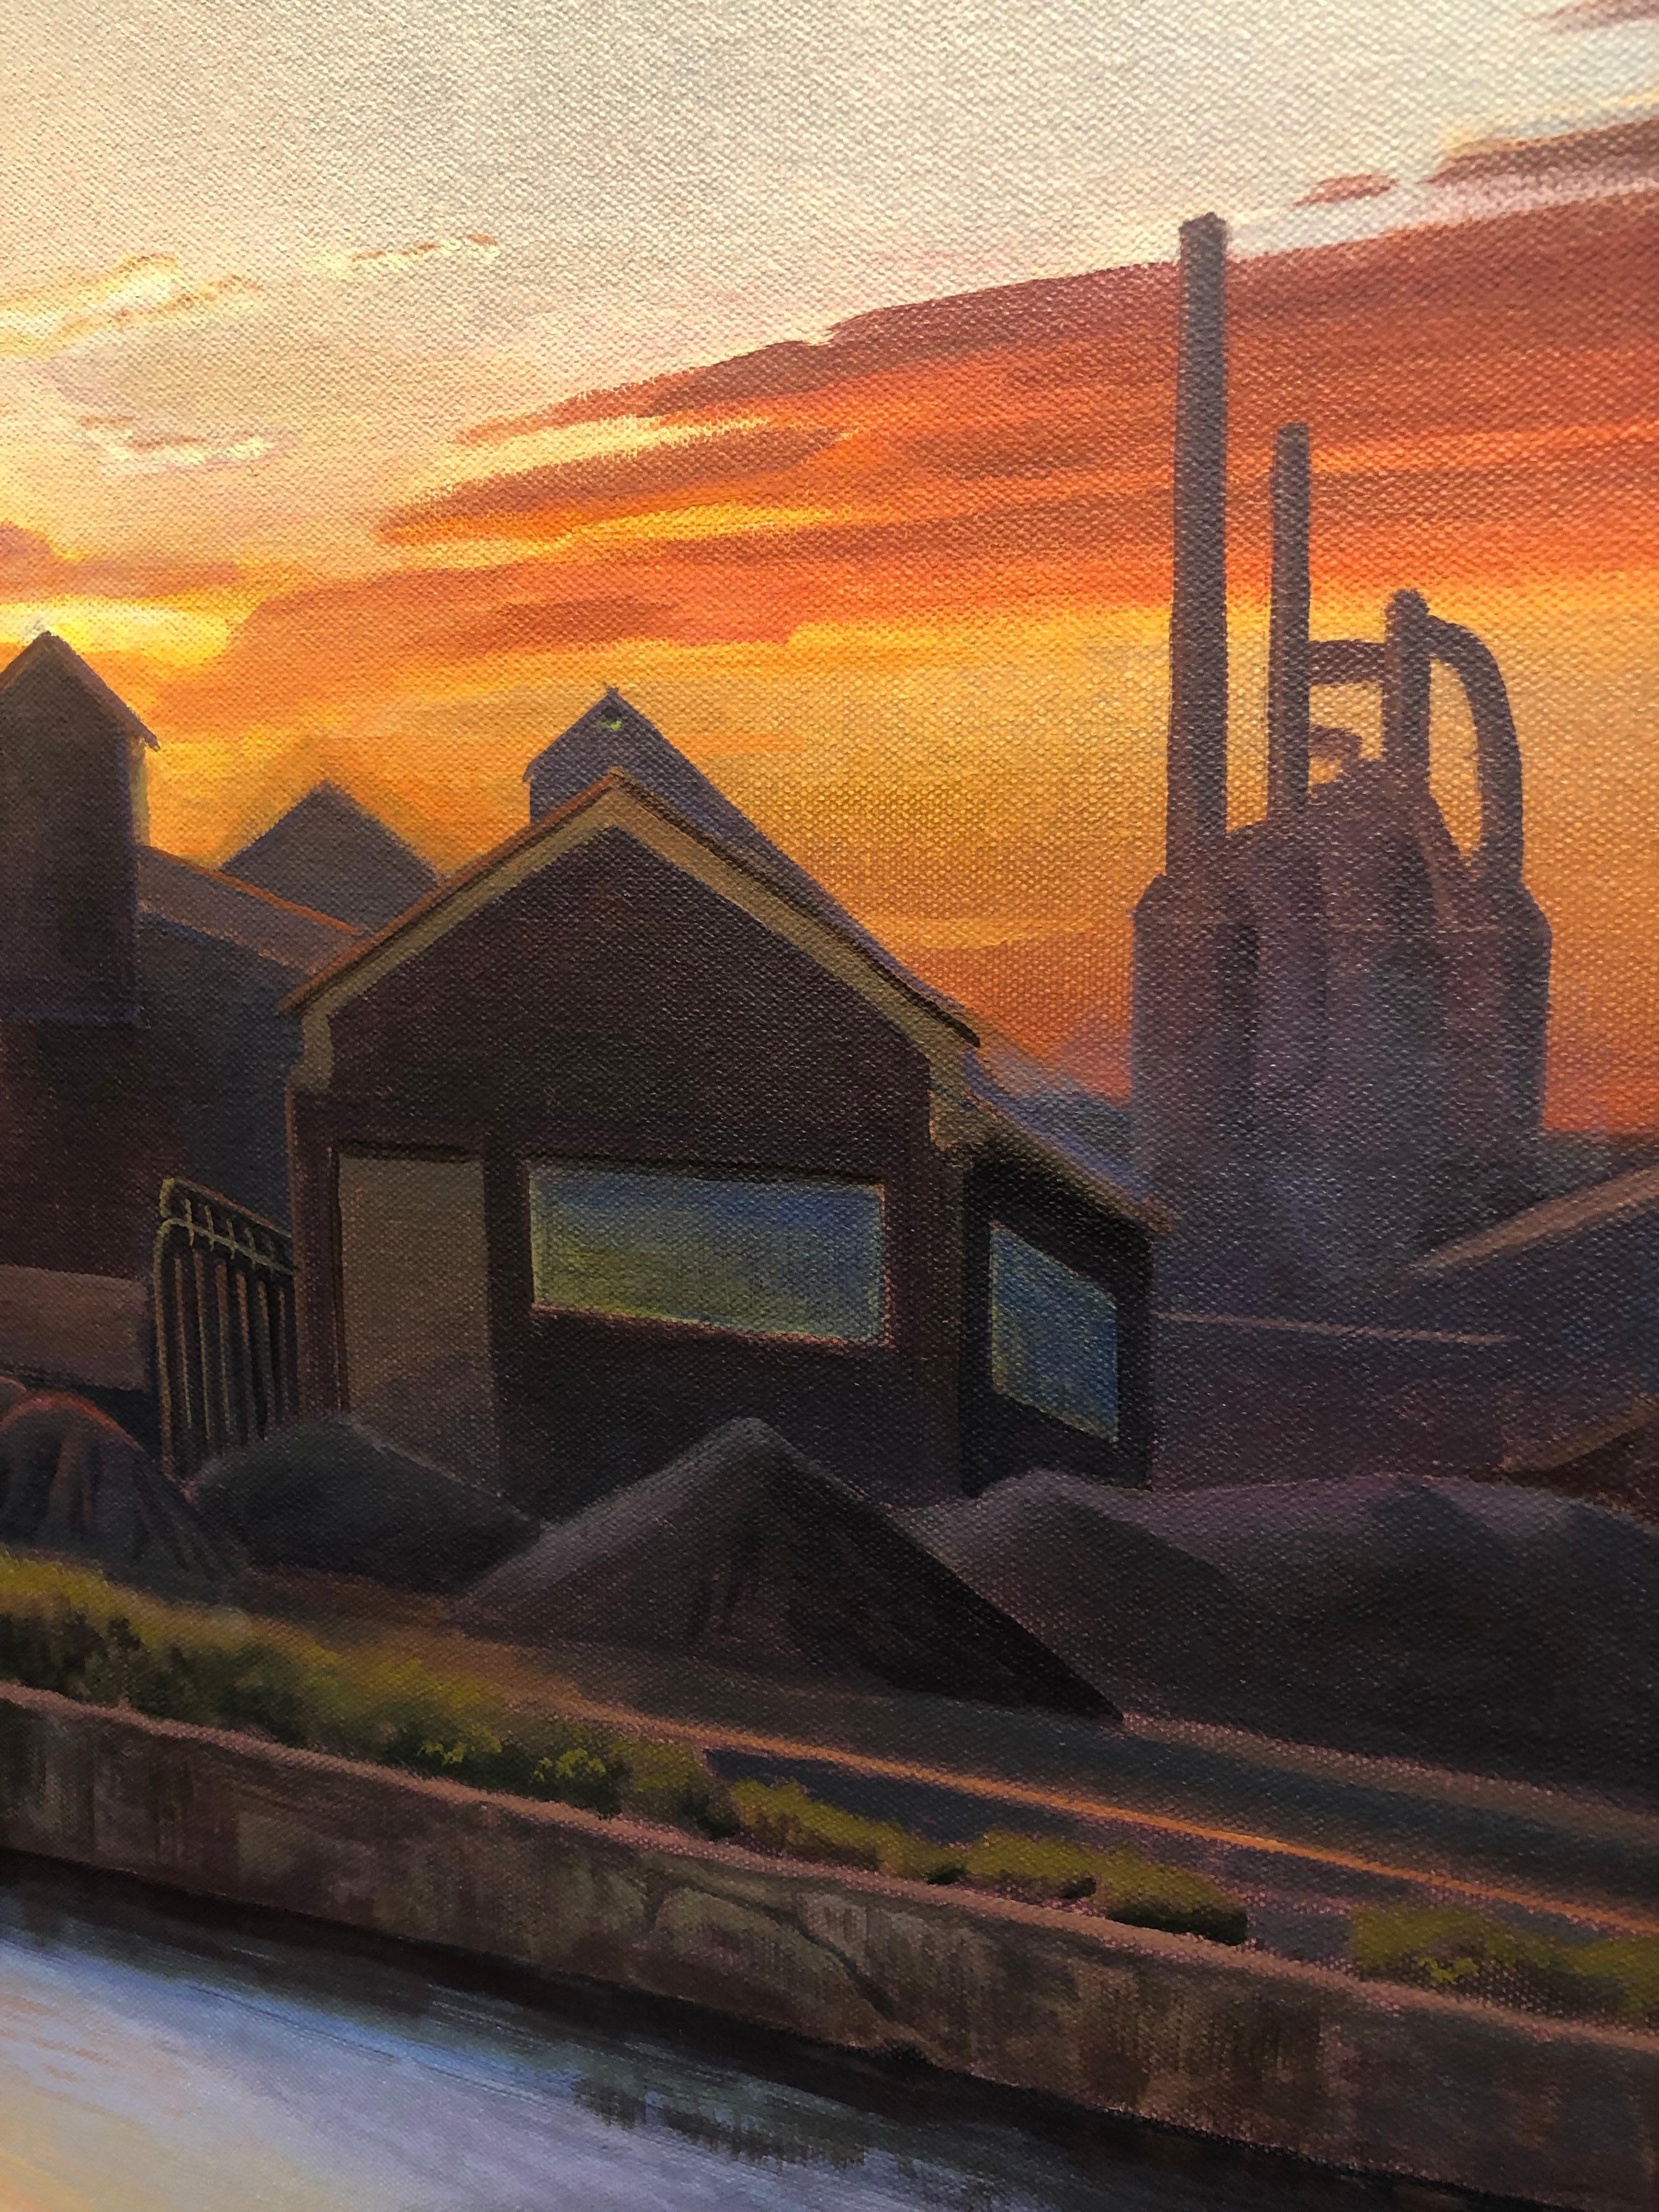 American Landscape - Iconic American Steel Mill Bathed in Orange Sunset Light 5